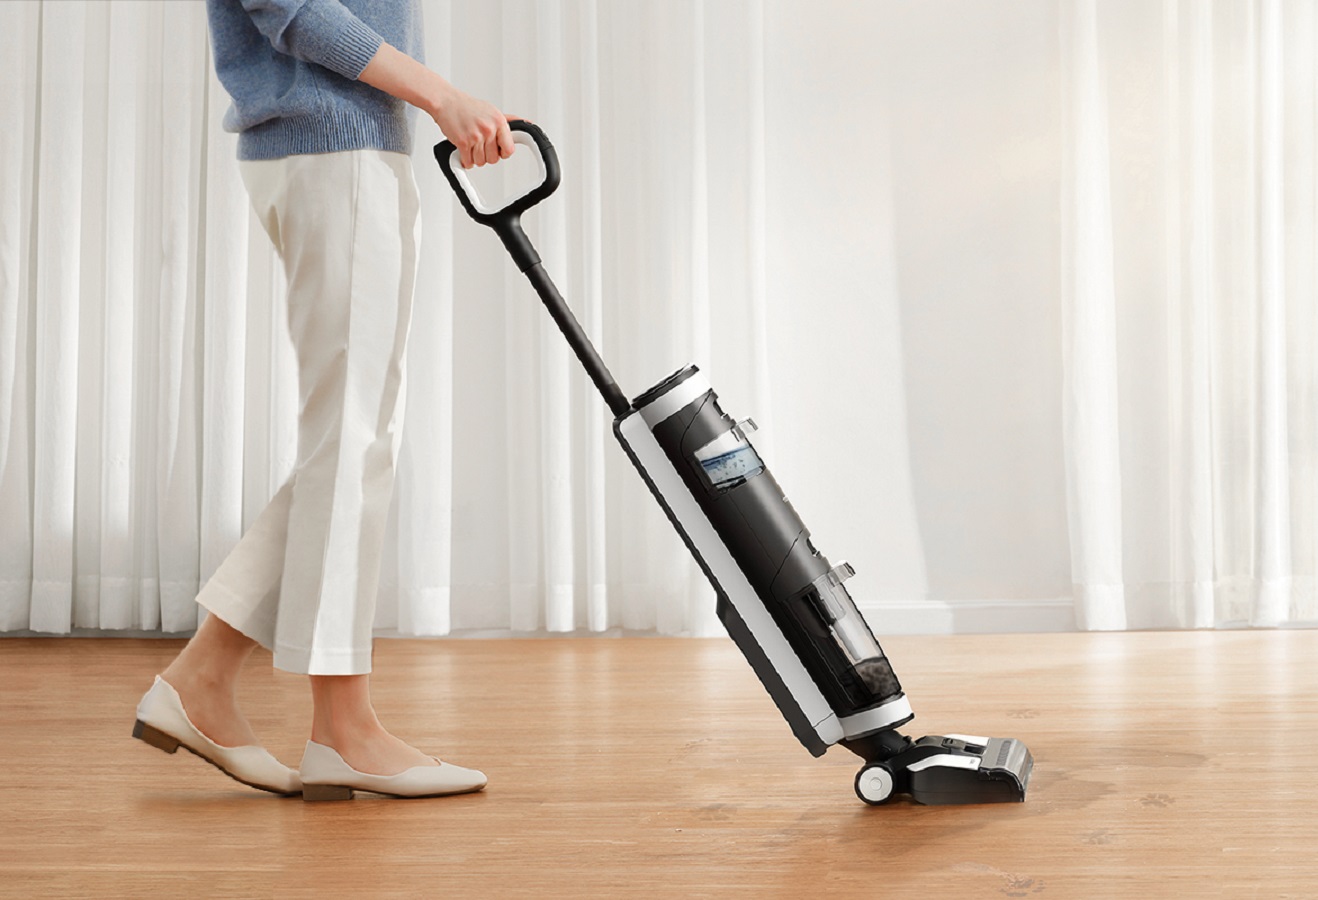 5 Best Cordless Vacuums for January 2022 | Check Reviews